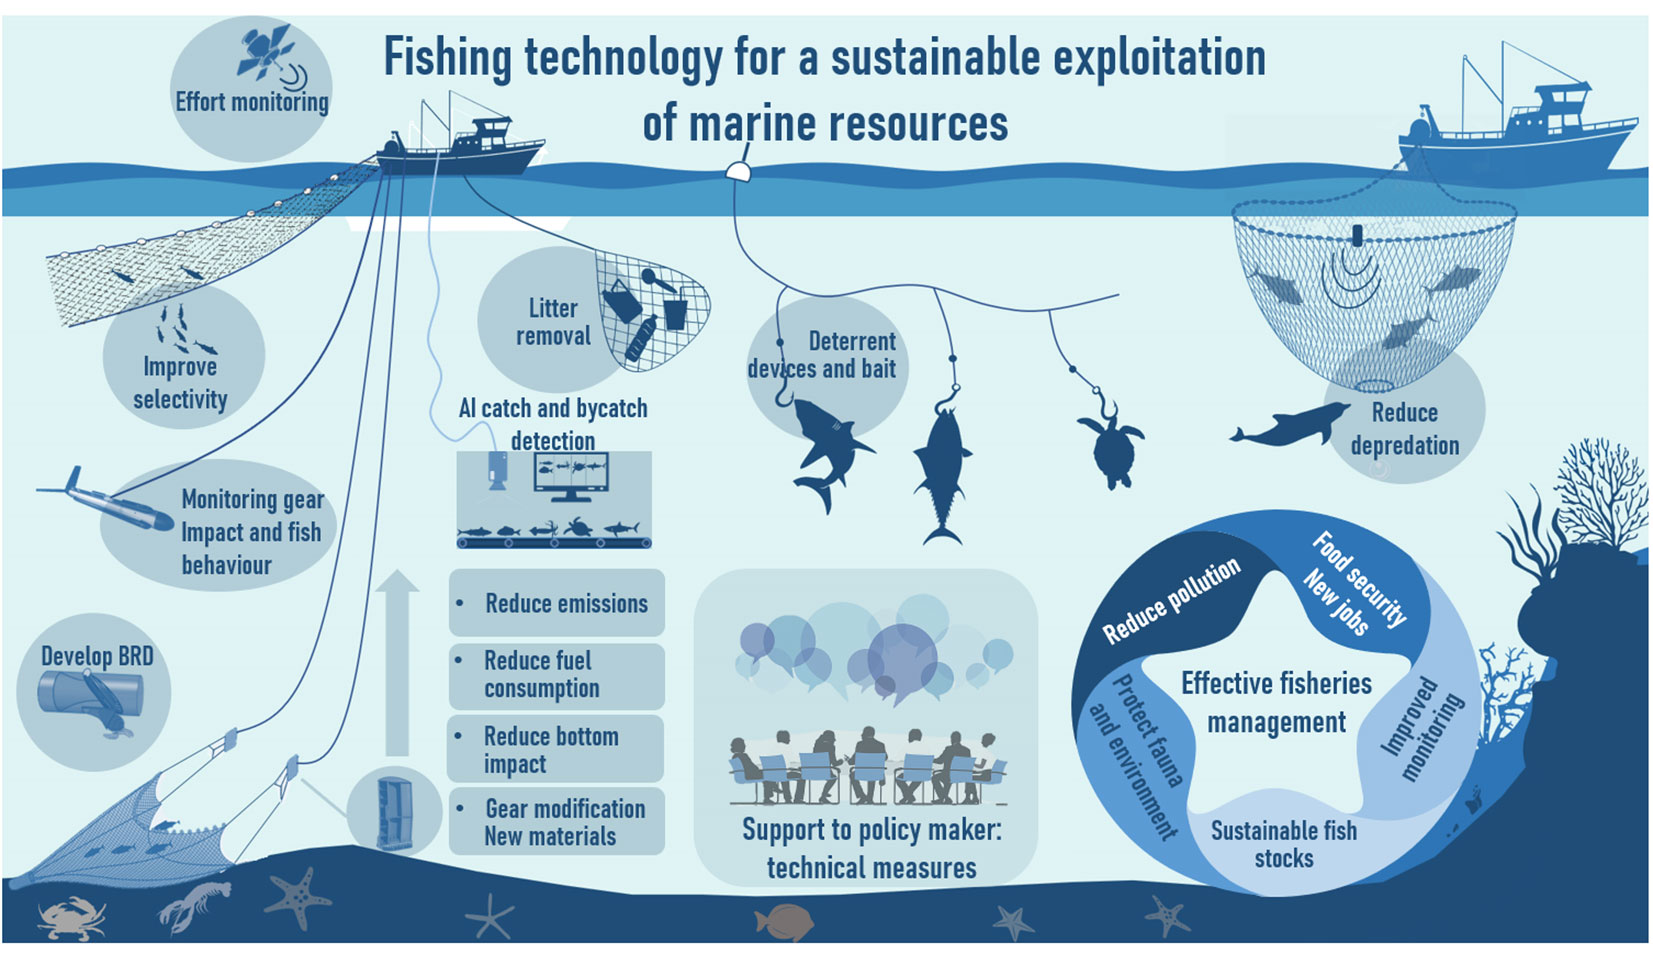 Frontiers | Editorial: Innovations in fishing technology aimed at ...